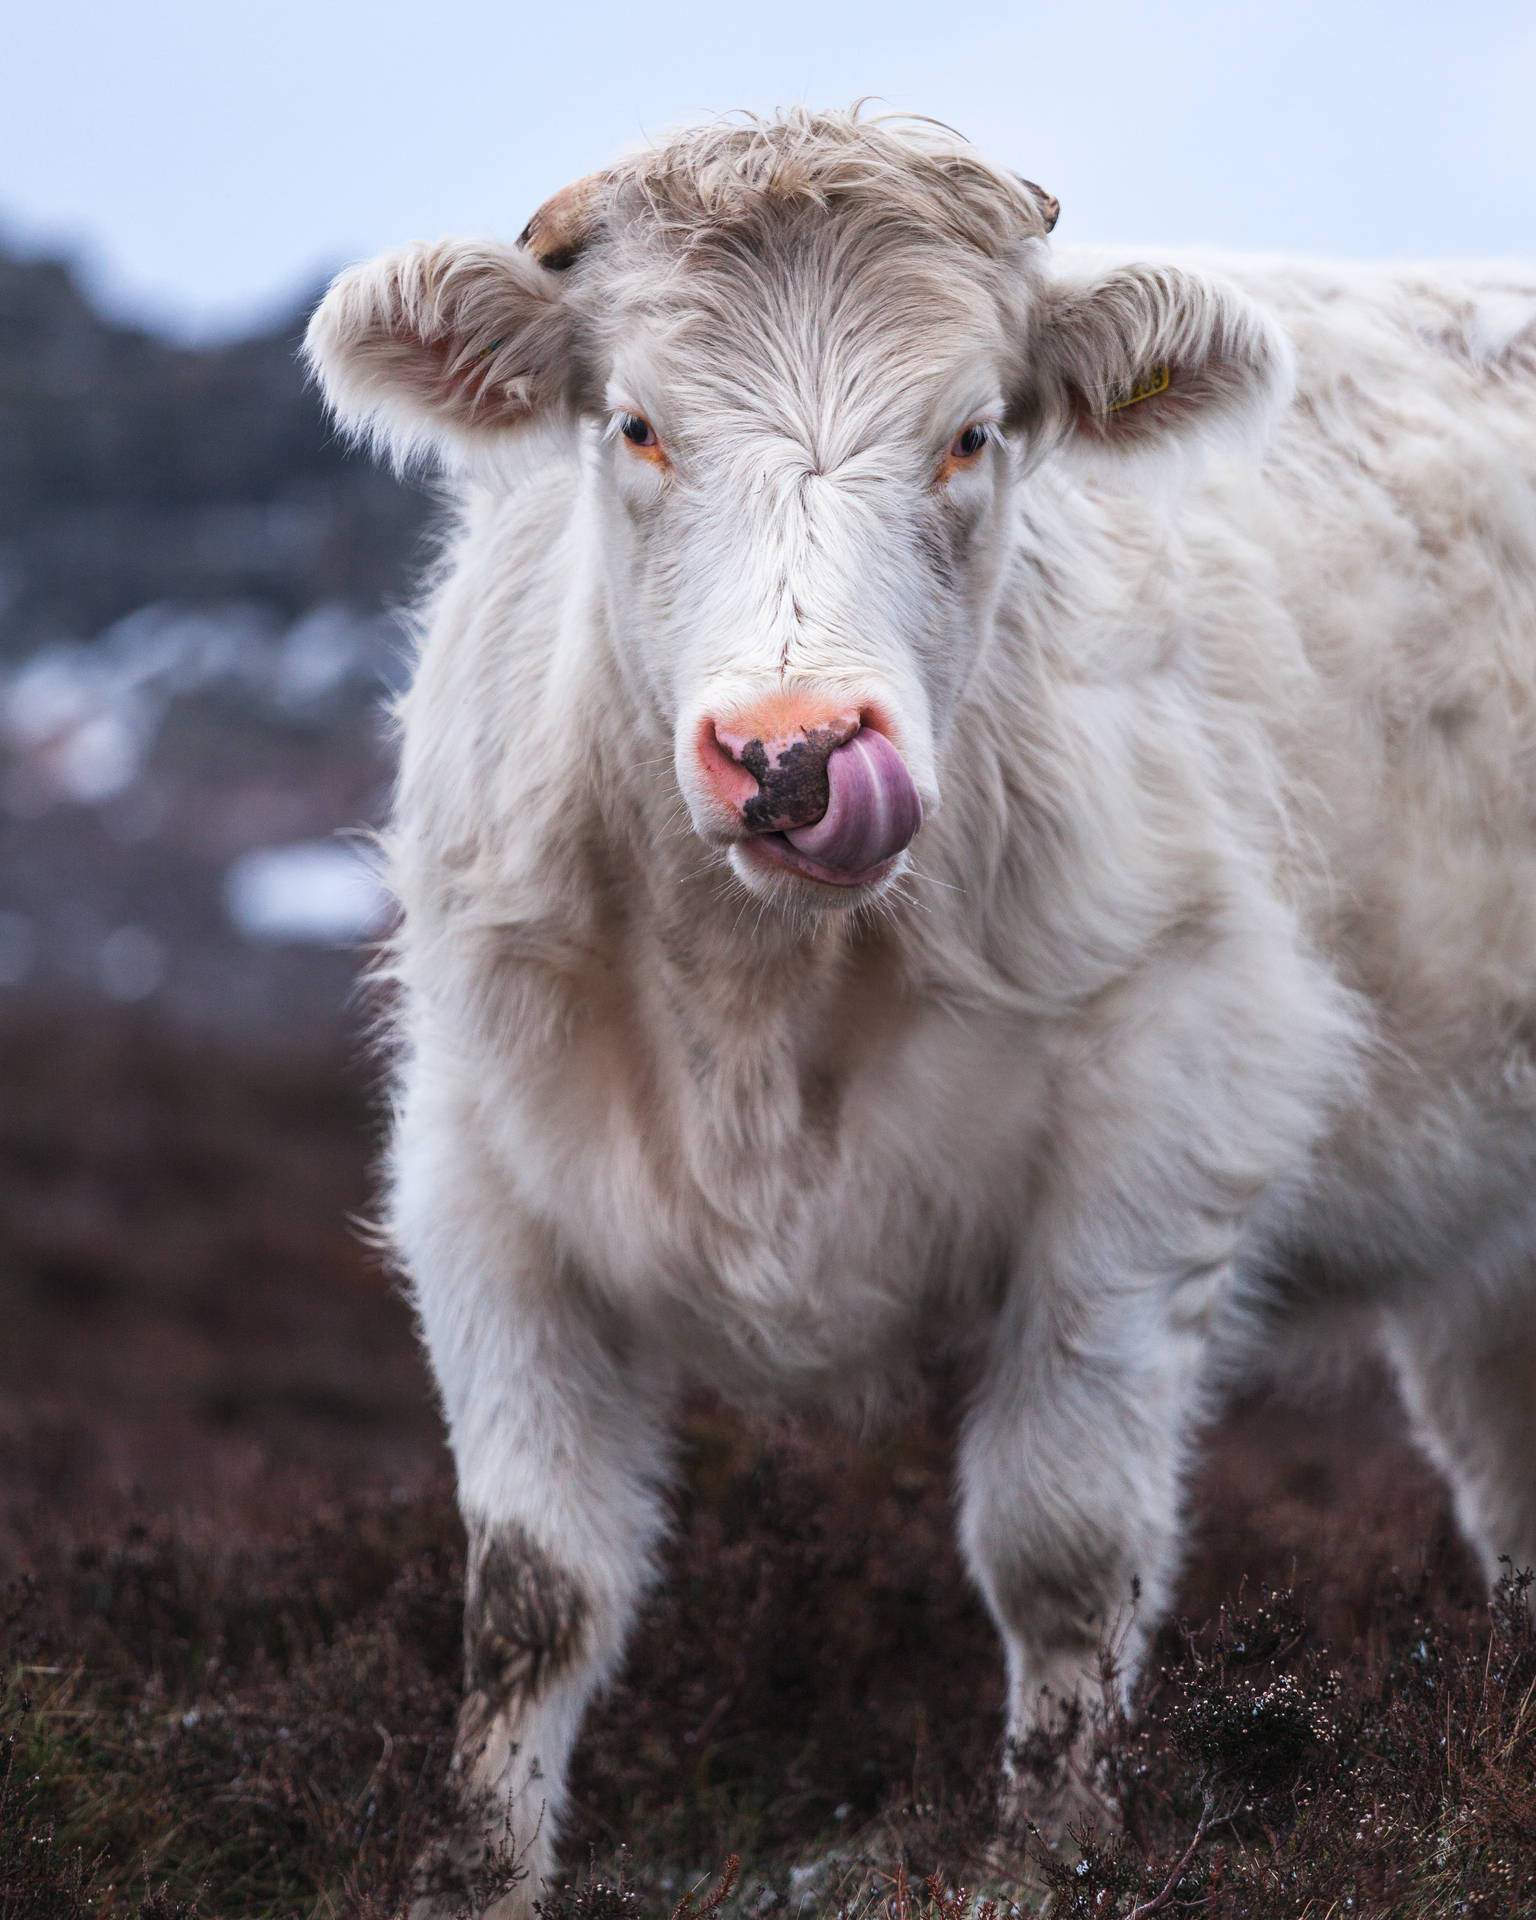 Cute White Cow Licking Lips